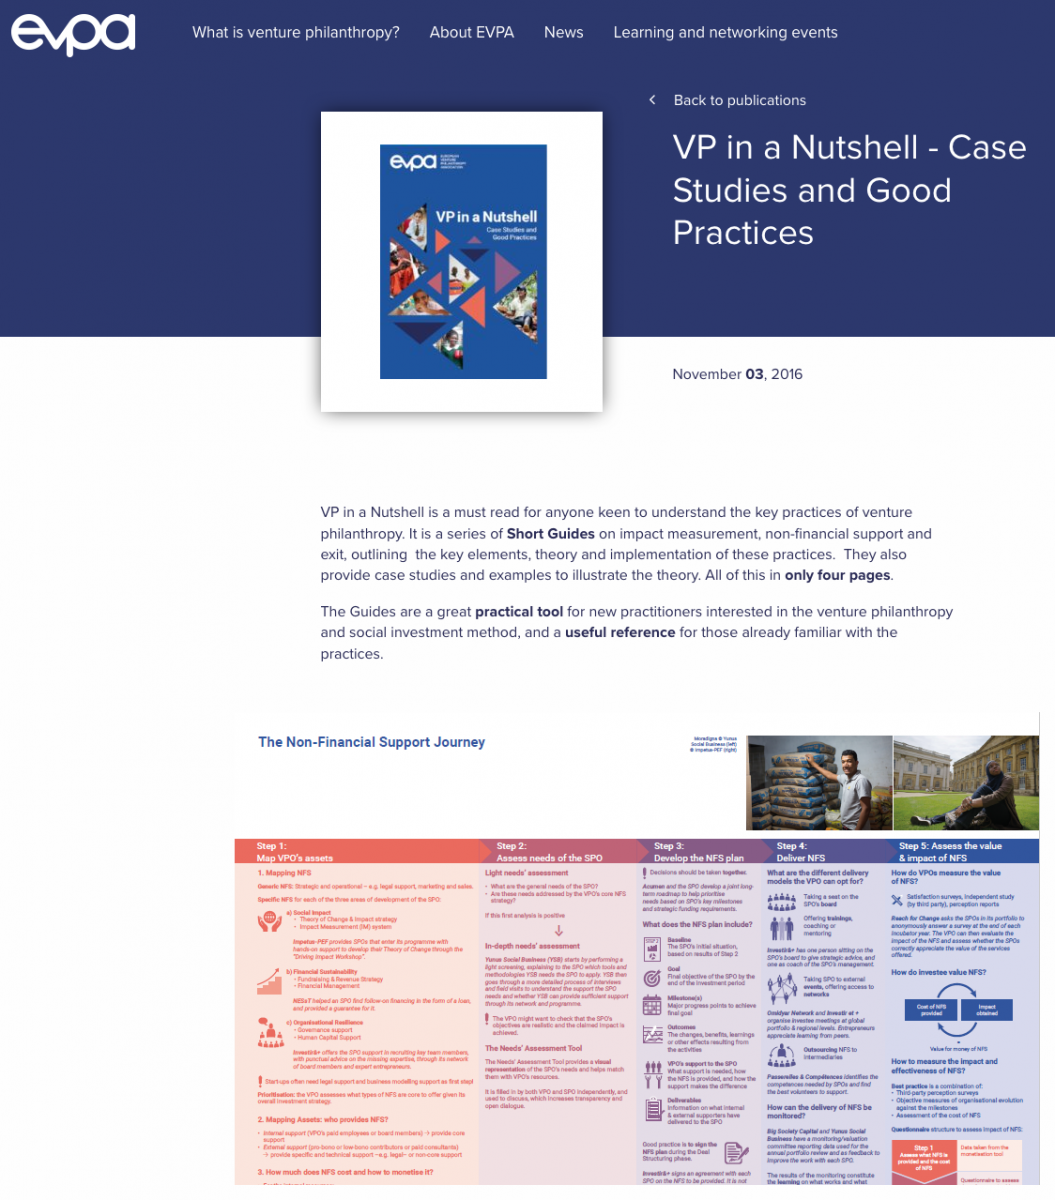 vp-in-a-nutshell-case-studies-and-good-practices